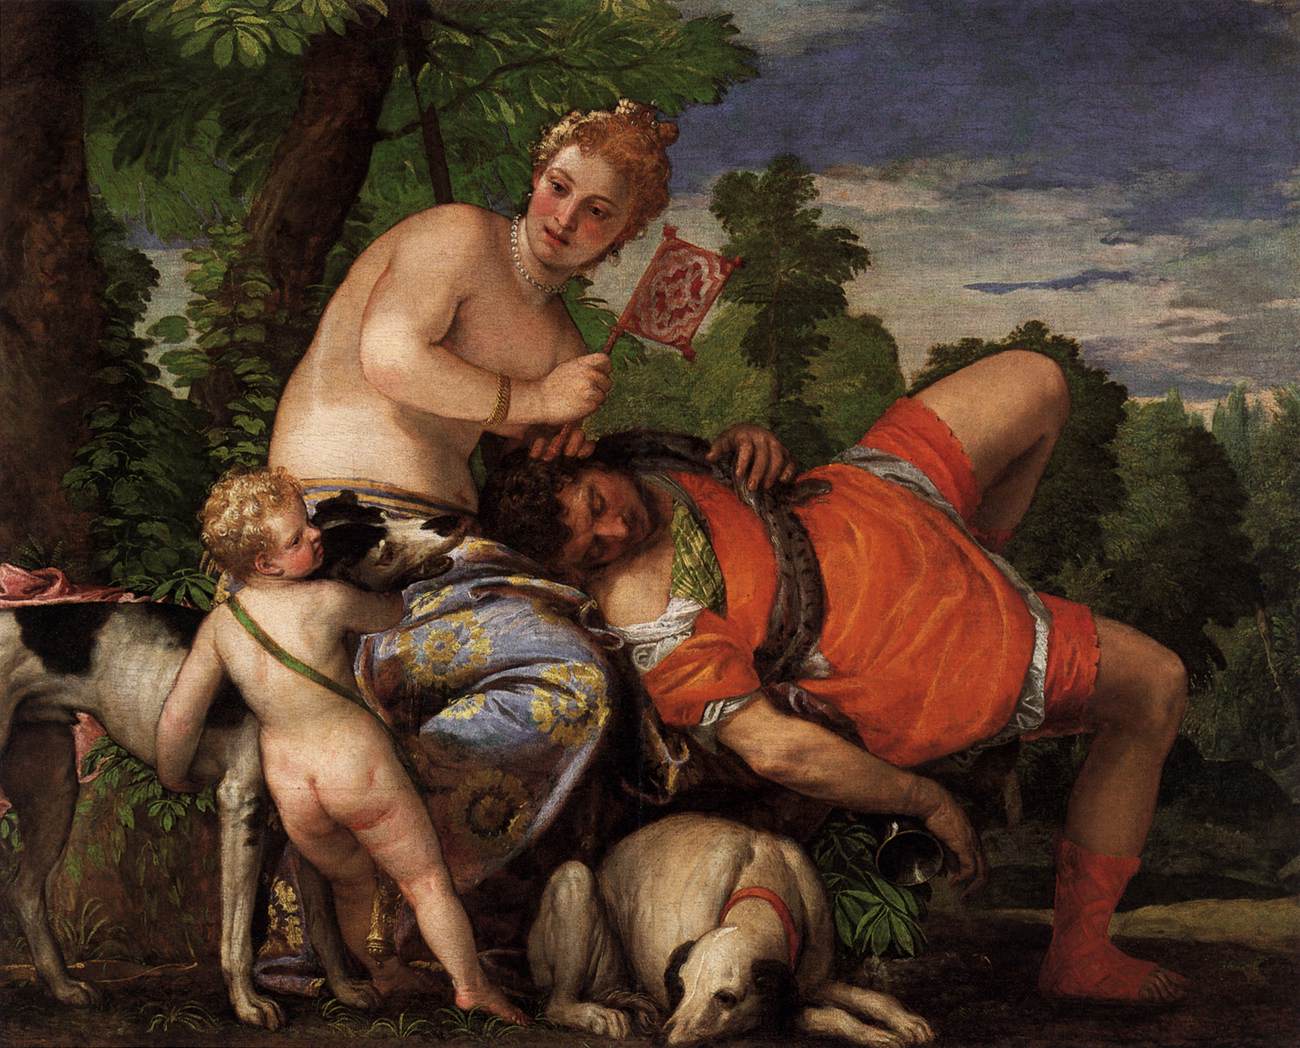 Venus And Adonis by Paolo Veronese, 1580